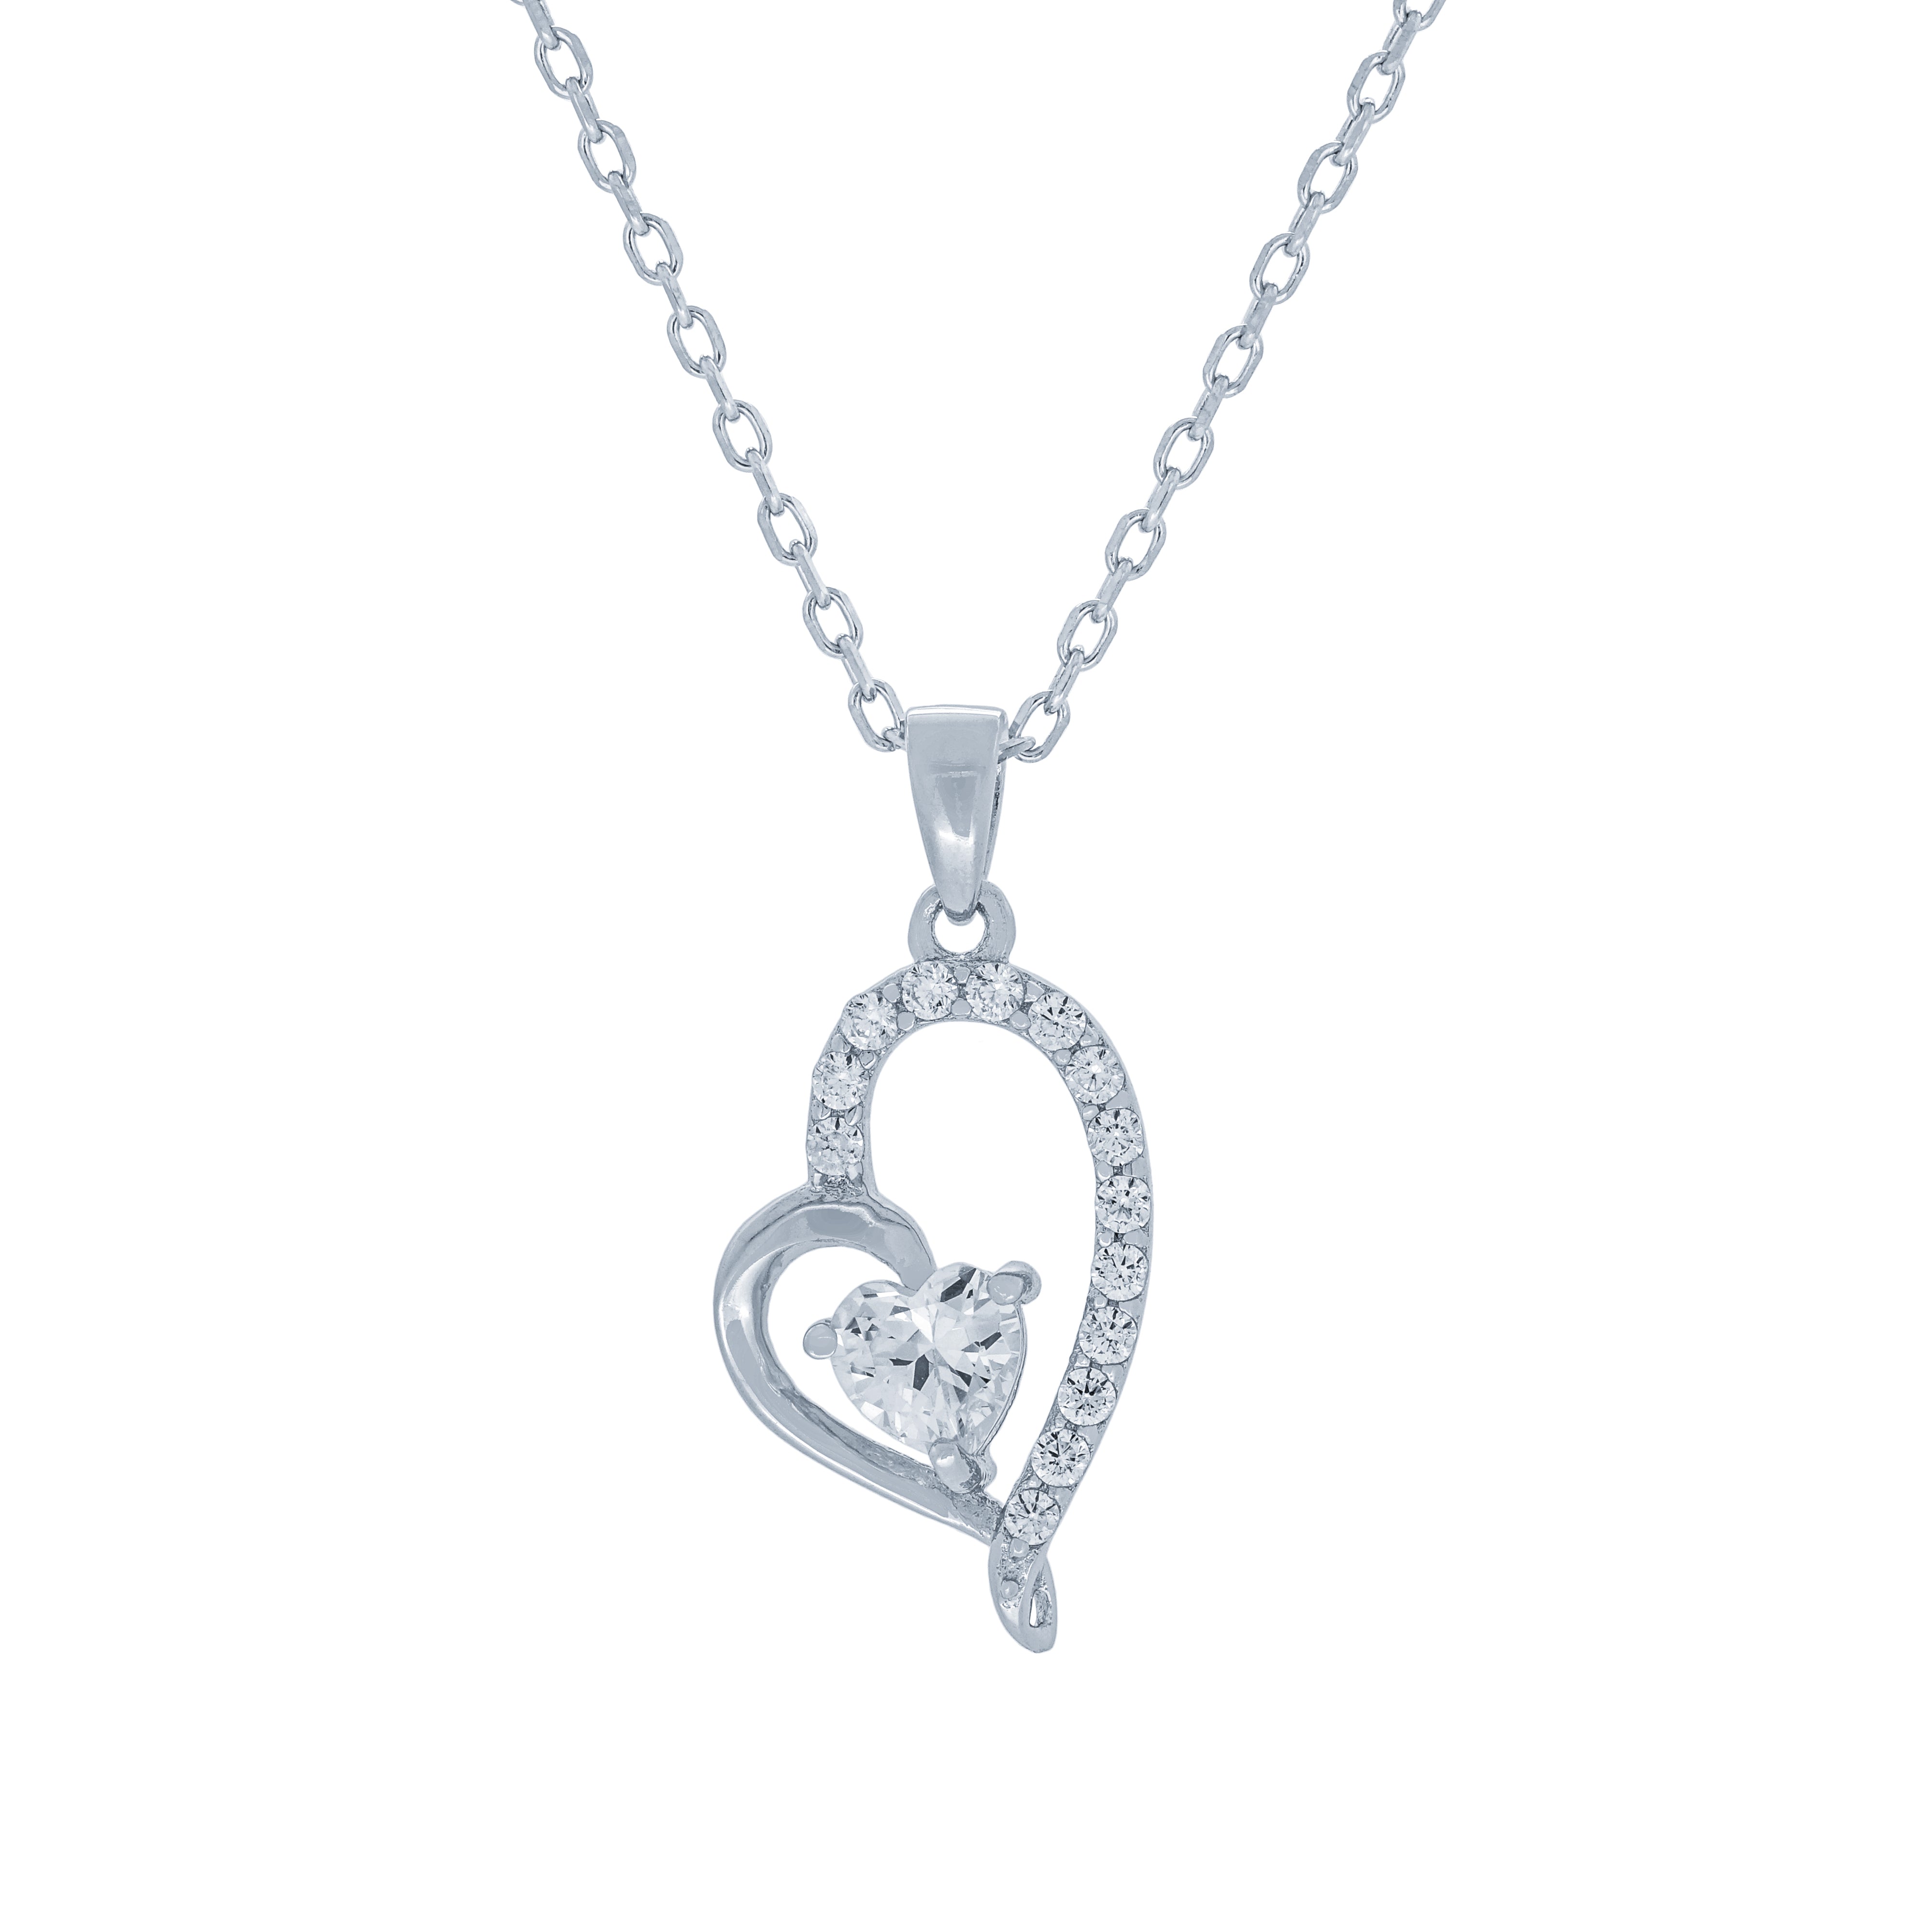 (100146) White Cubic Zirconia Heart Pendant Necklace In Sterling Silver